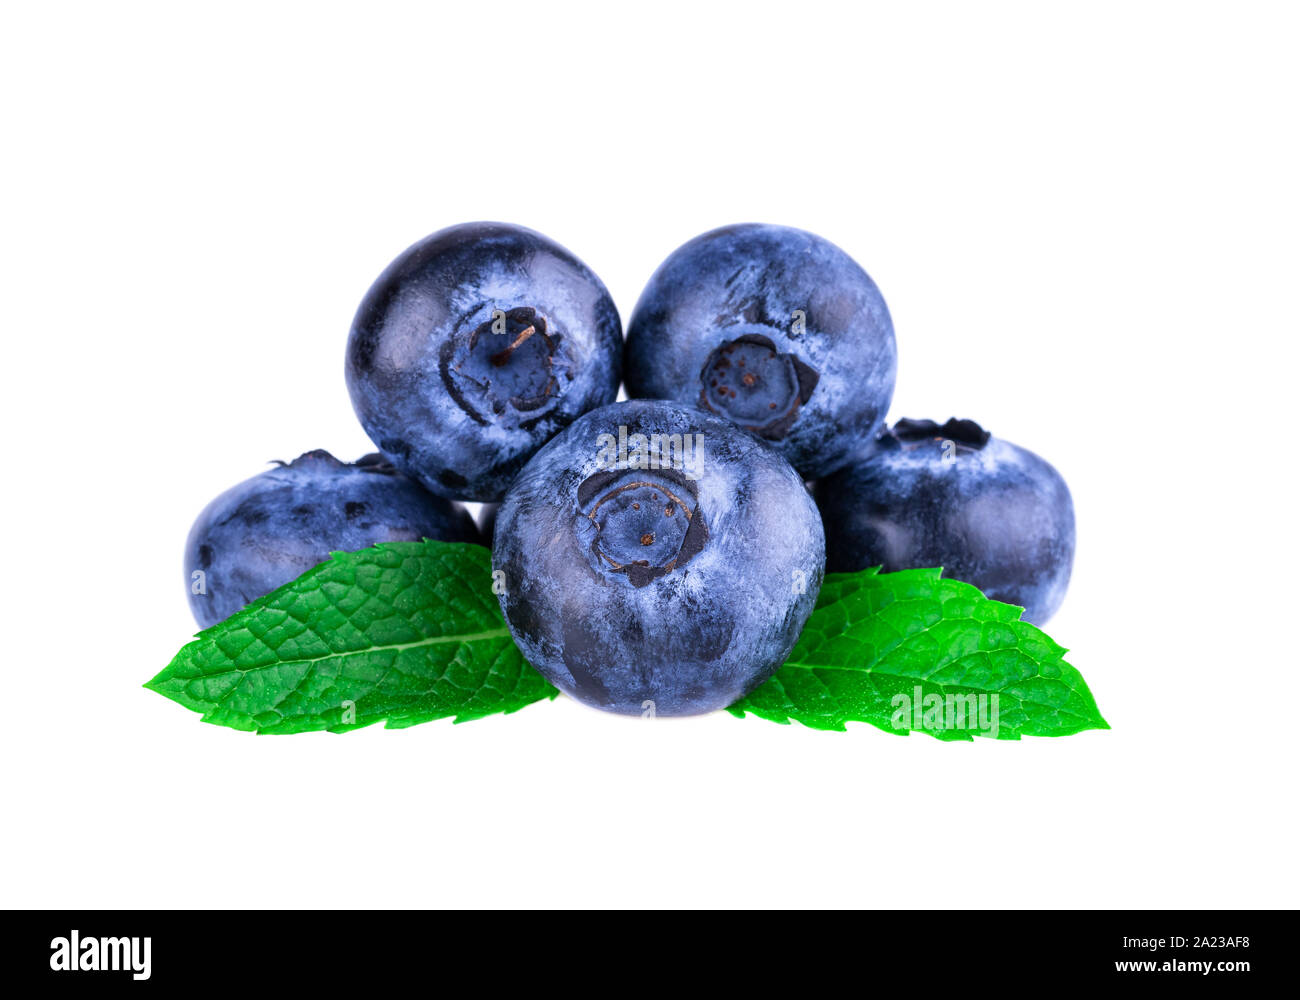 Blueberries in close up. Stack of blueberries with mint leaf isolated on white. Stock Photo